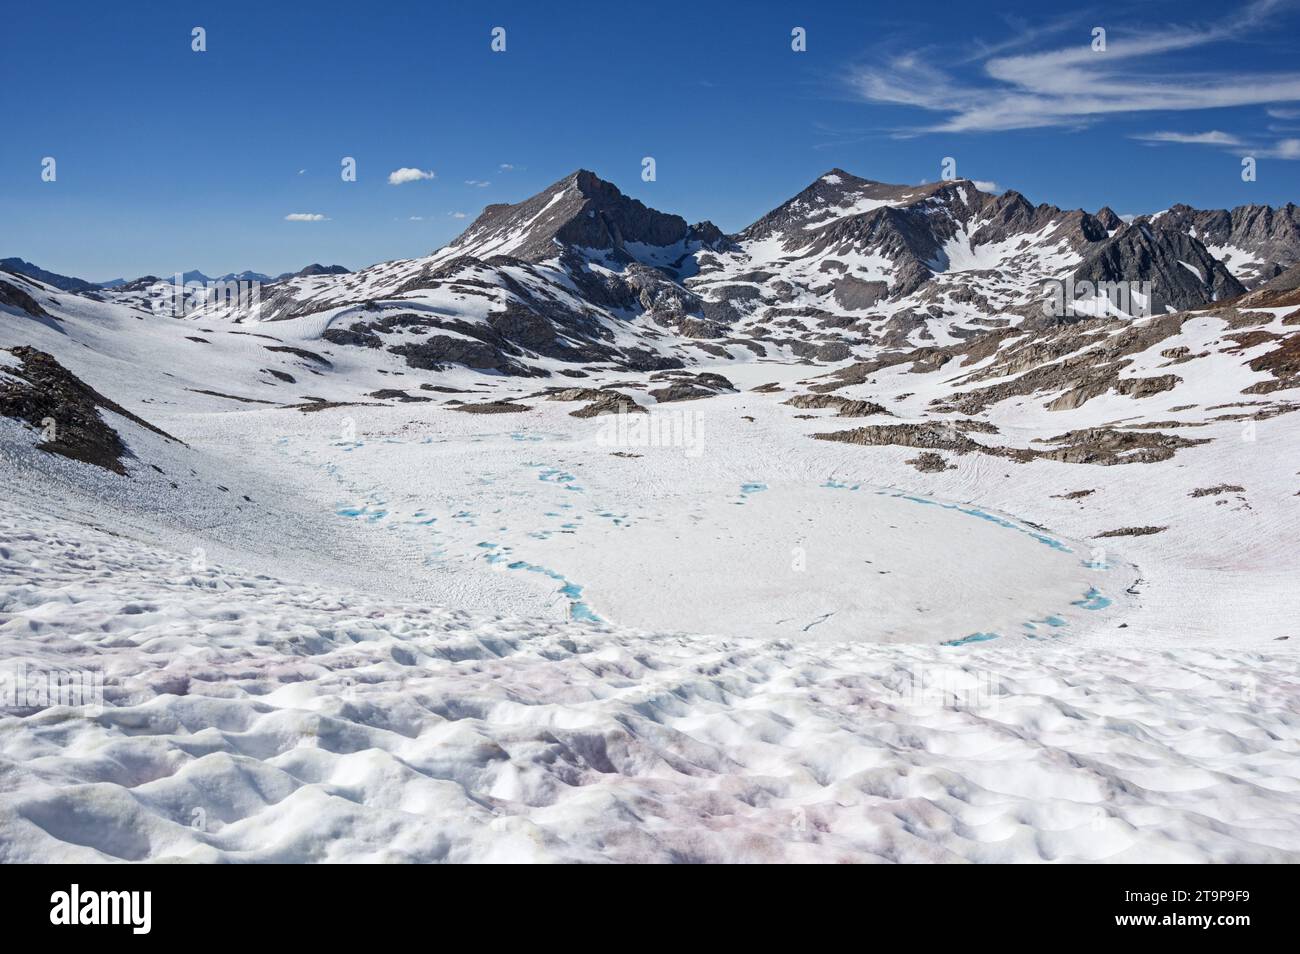 Muir Pass Mount Warlow and Mount Fiske beyond a frozen lake in Kings Canyon National Park in the Sierra Nevada Mountains of California in July of a hi Stock Photo